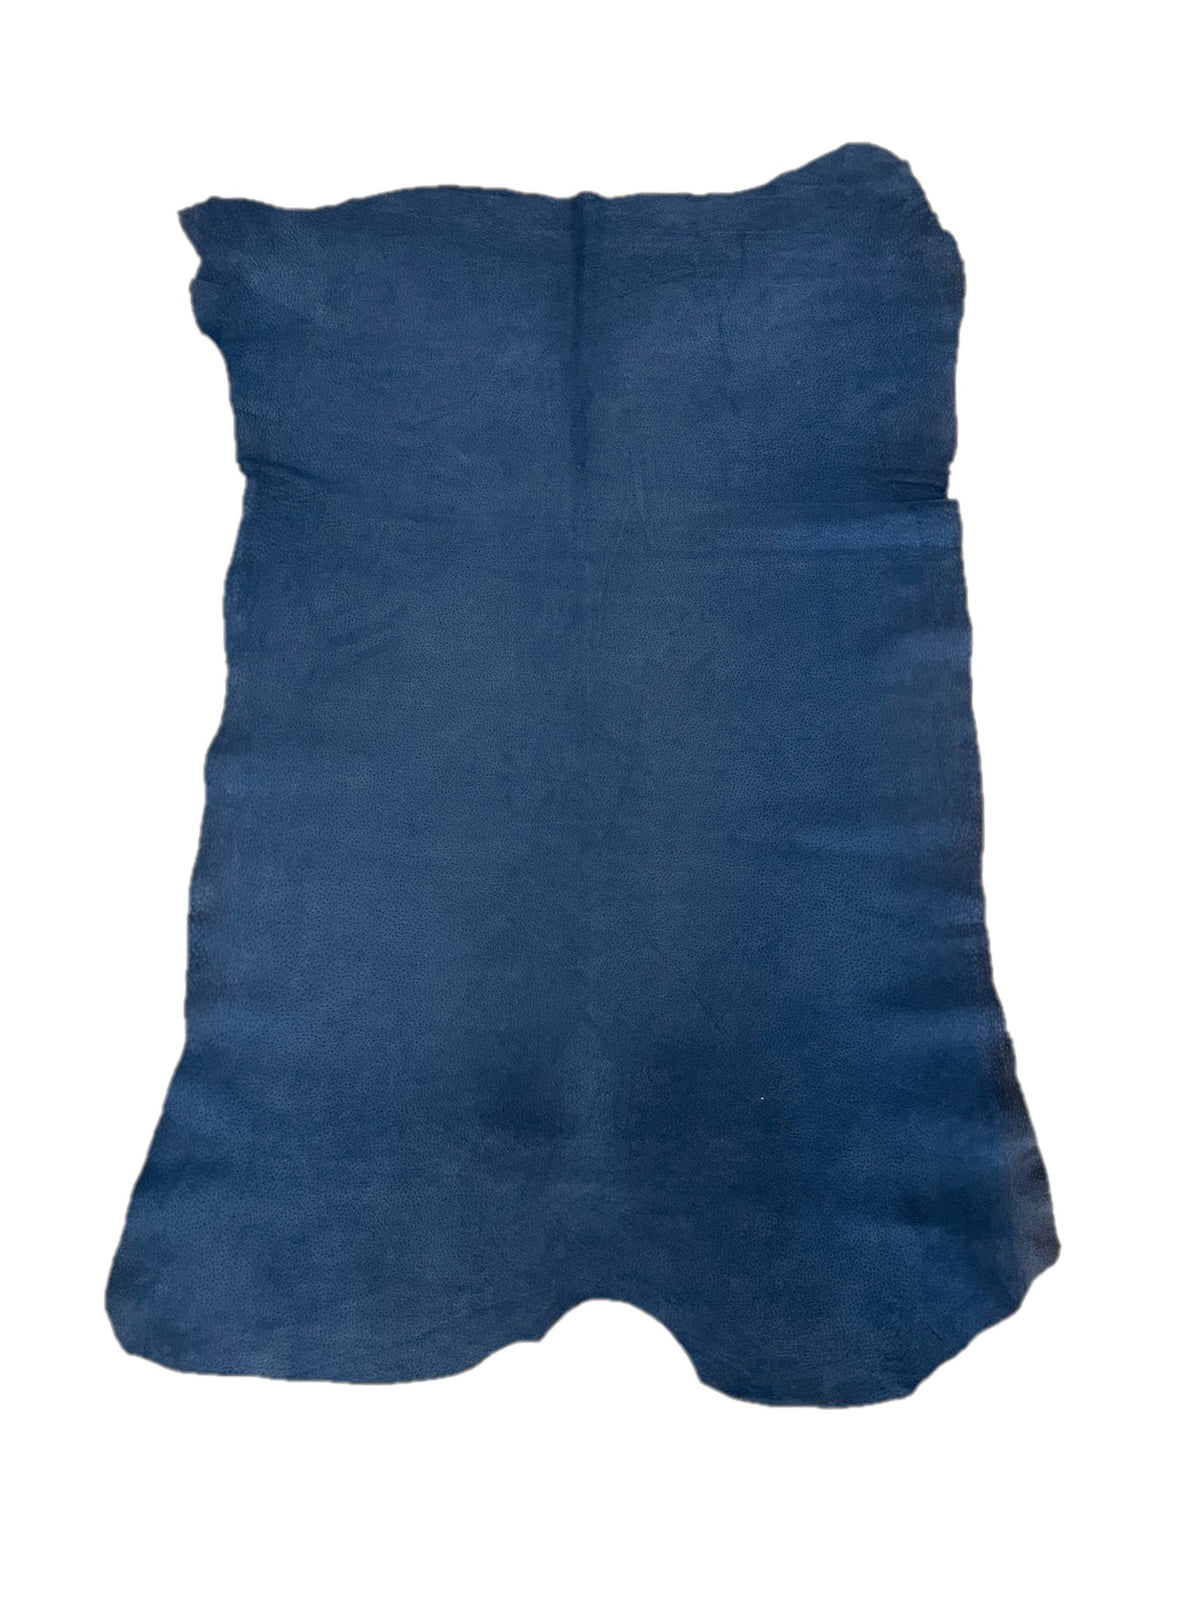 Pig Skin Suede | Navy | 0.6 mm | 8 sq.ft | From $25 ea.